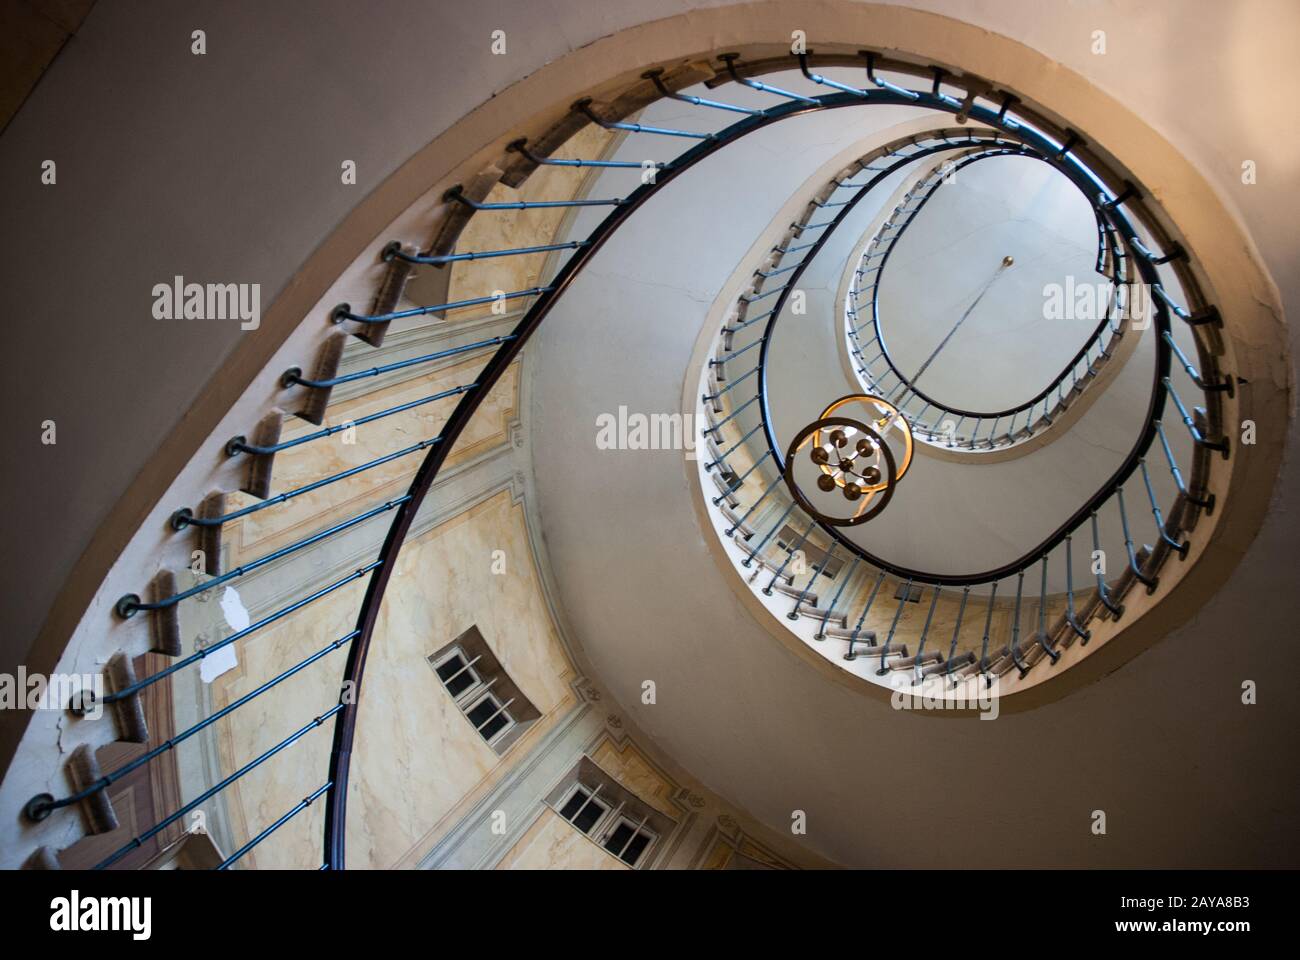 Paris, France - August 05, 2006: Bottom view of the spiral staircase in the gallery of Vivienne Stock Photo